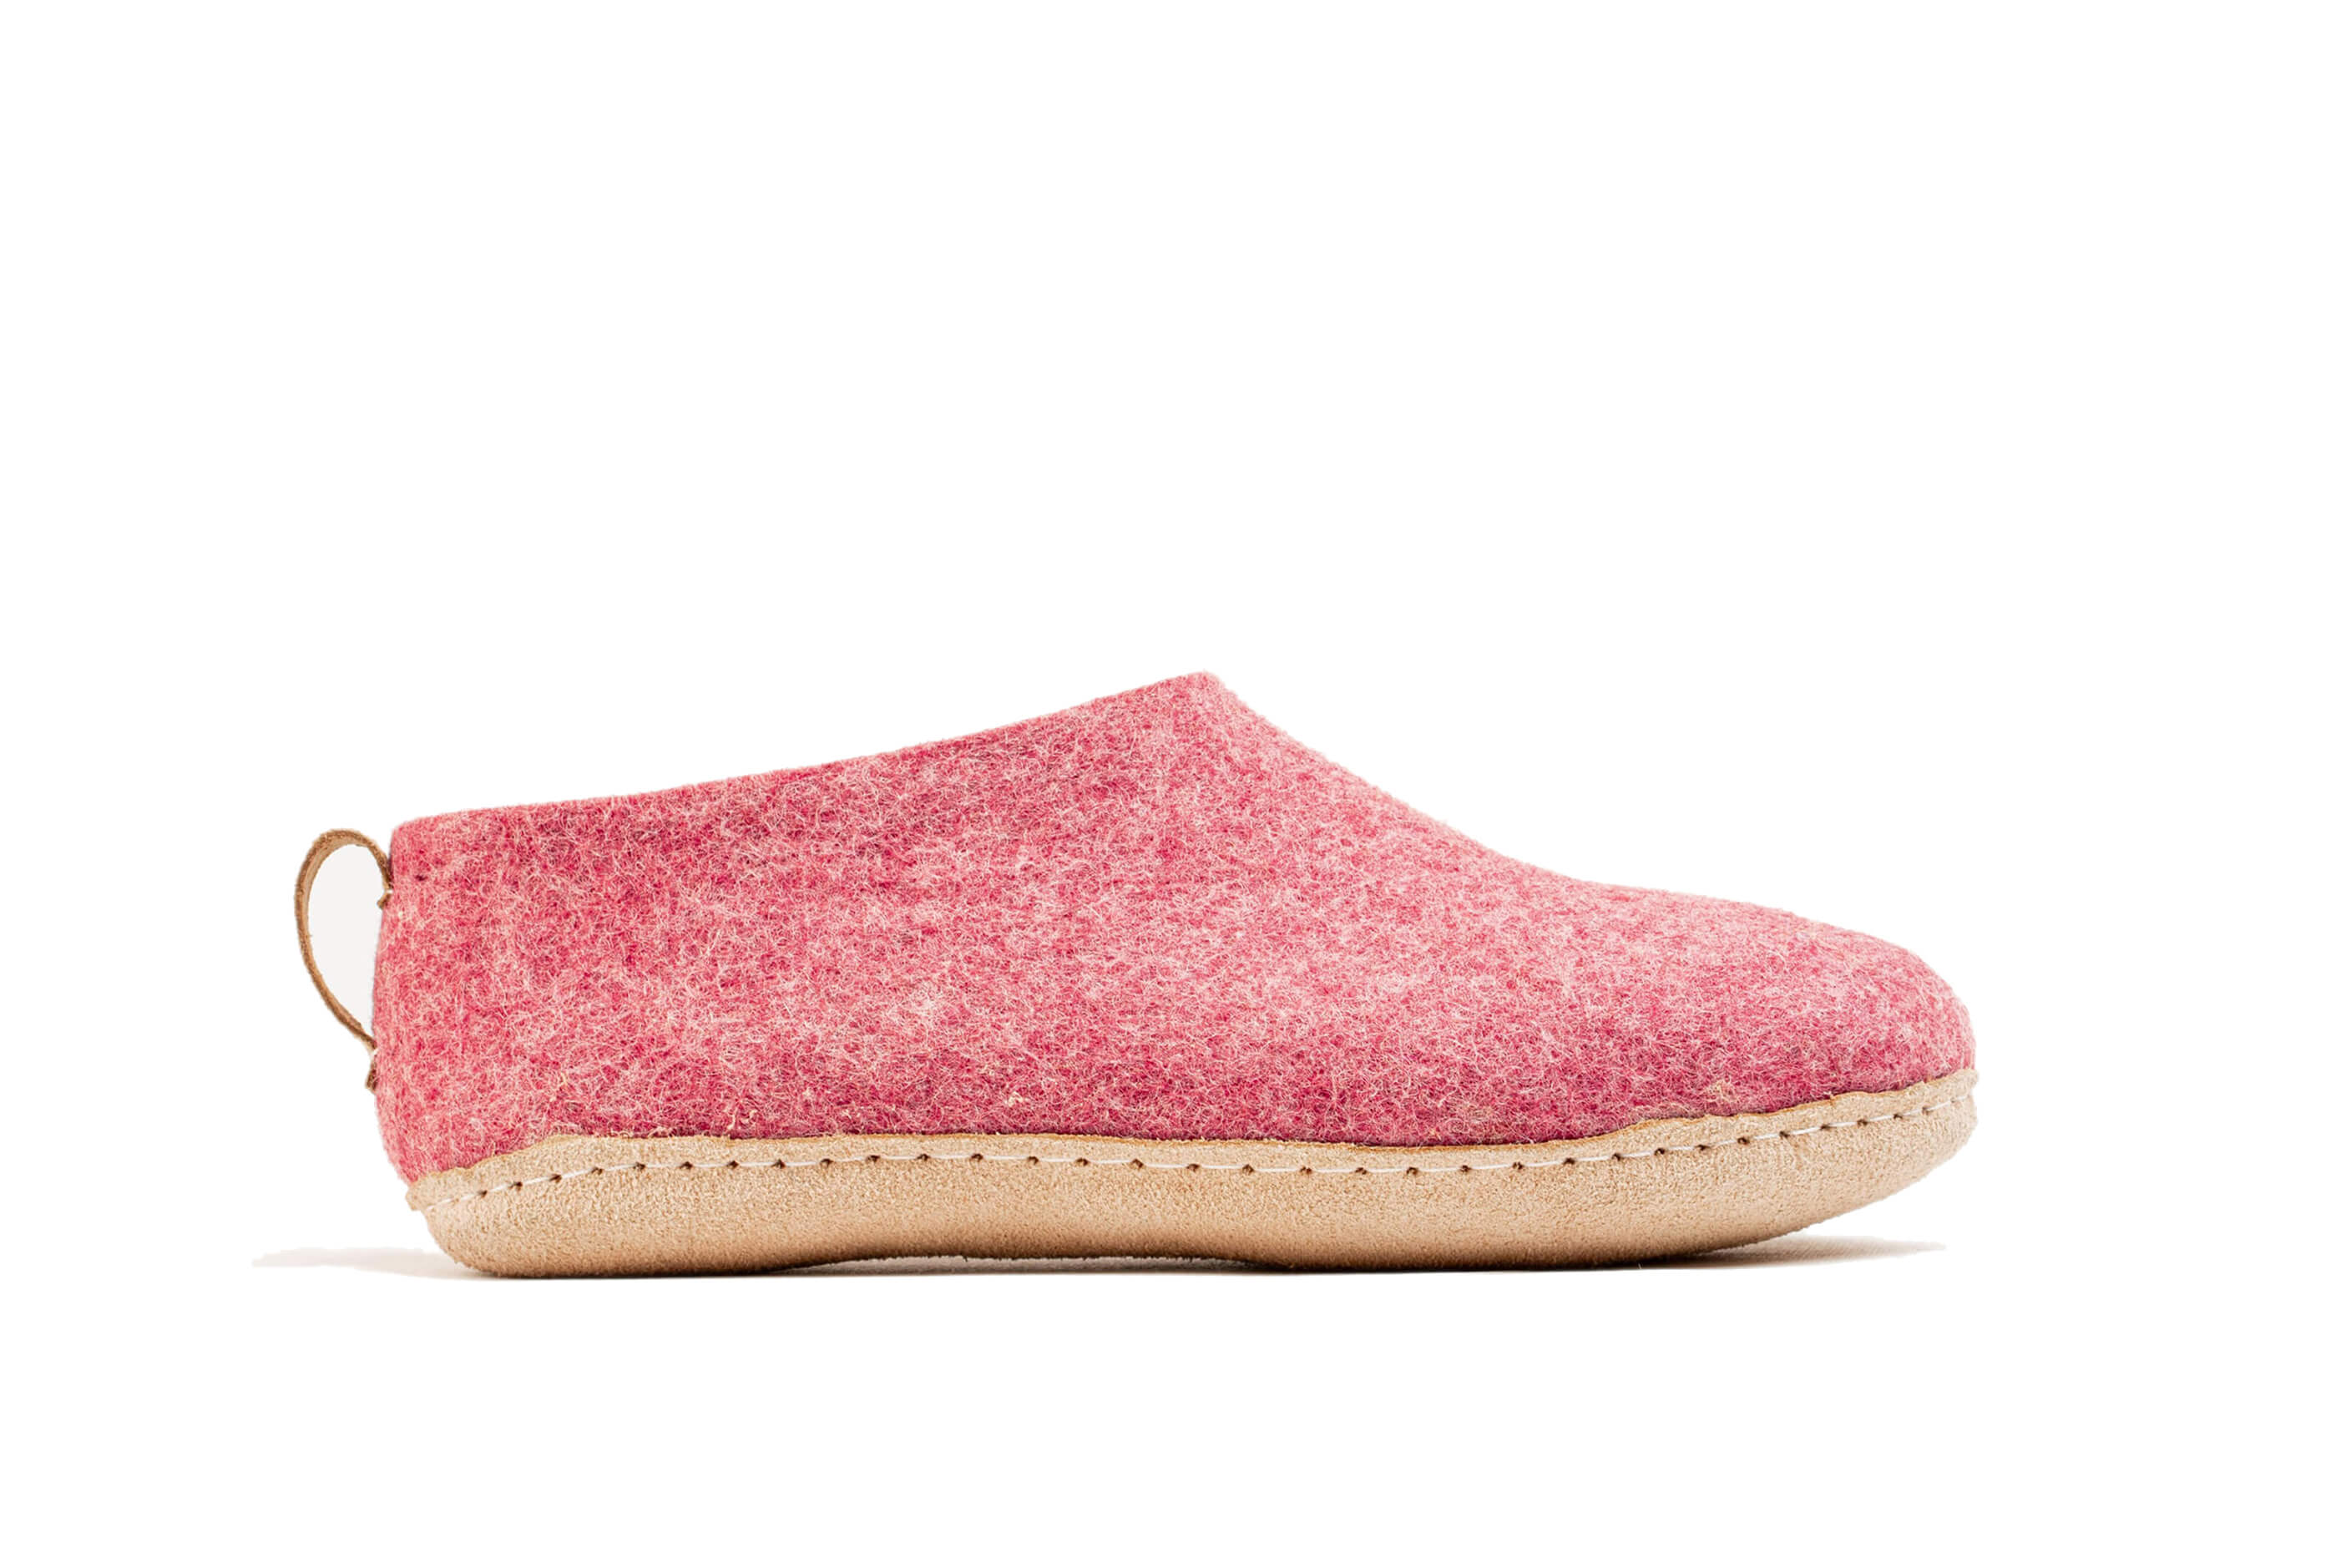 Indoor Shoes With Leather Sole - Cherry Pink